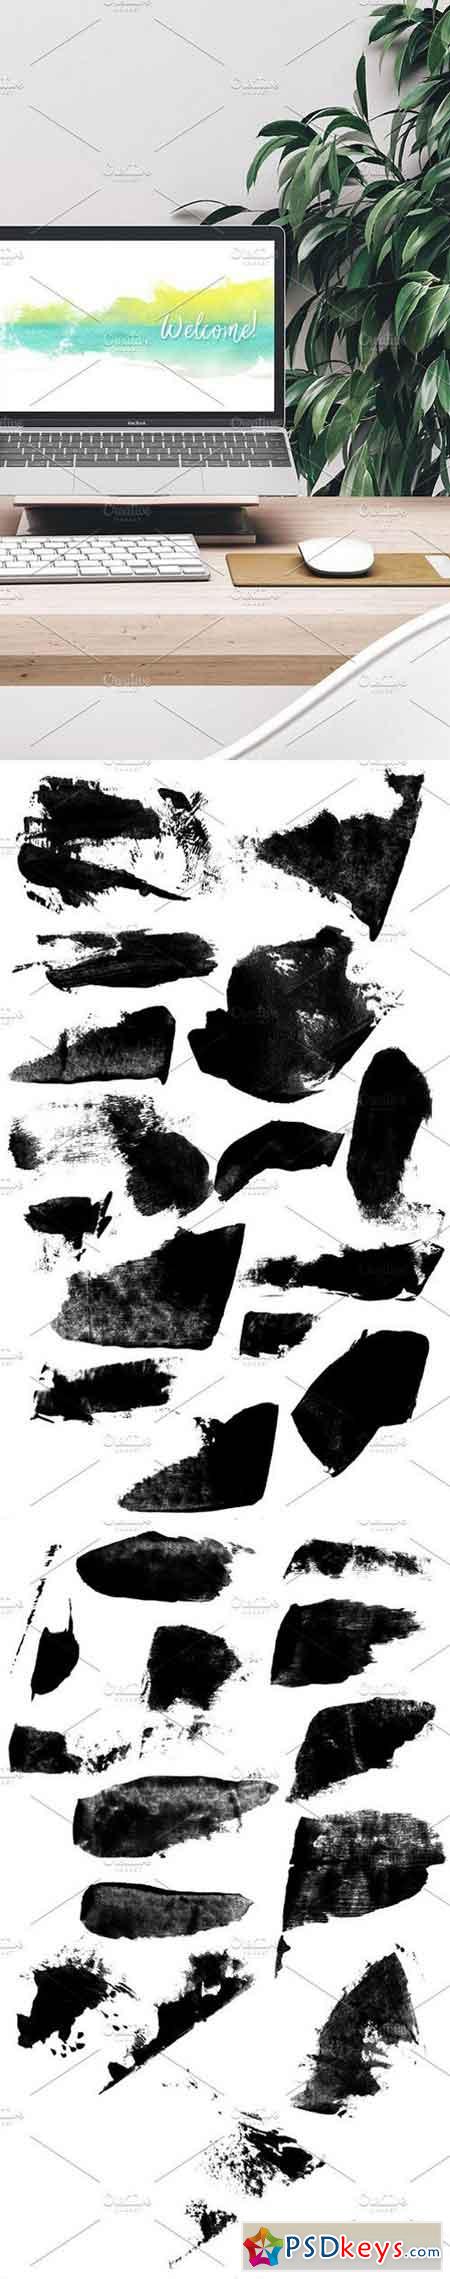 PS Brushes 1 1259188